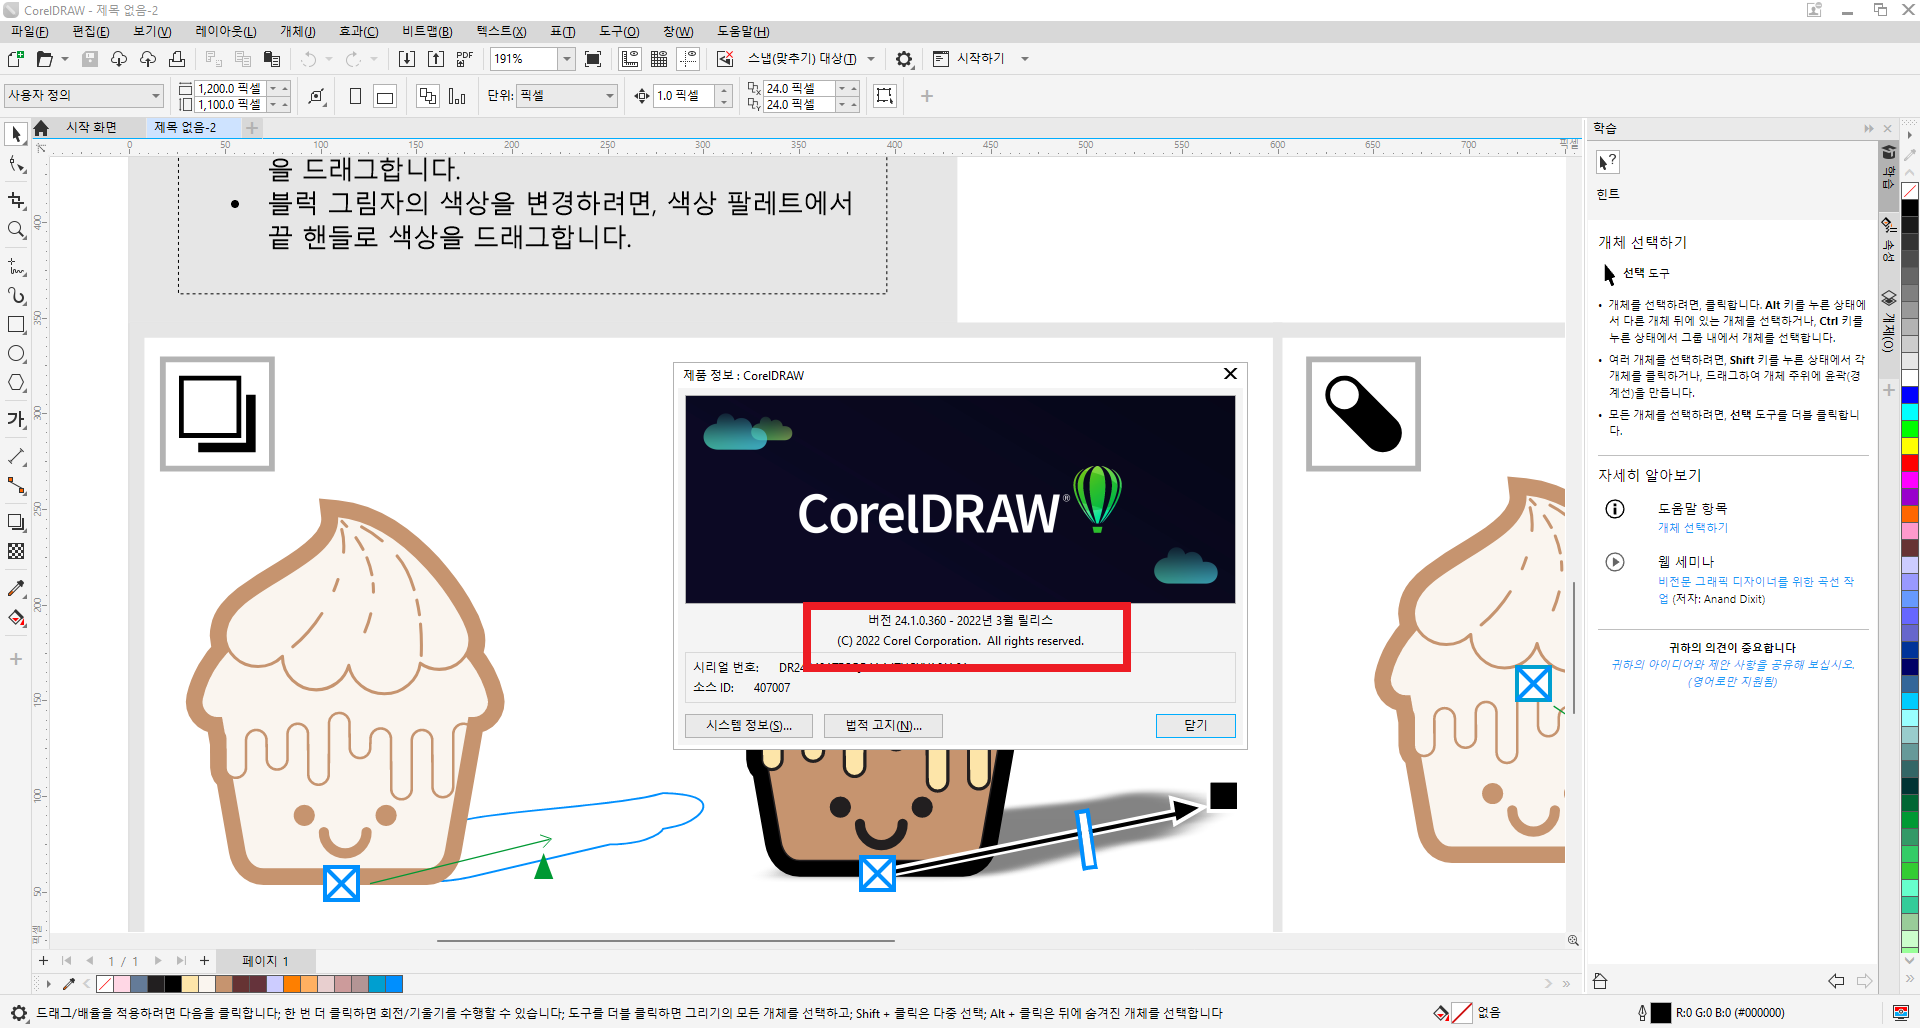 About_CorelDRAW_GS.png